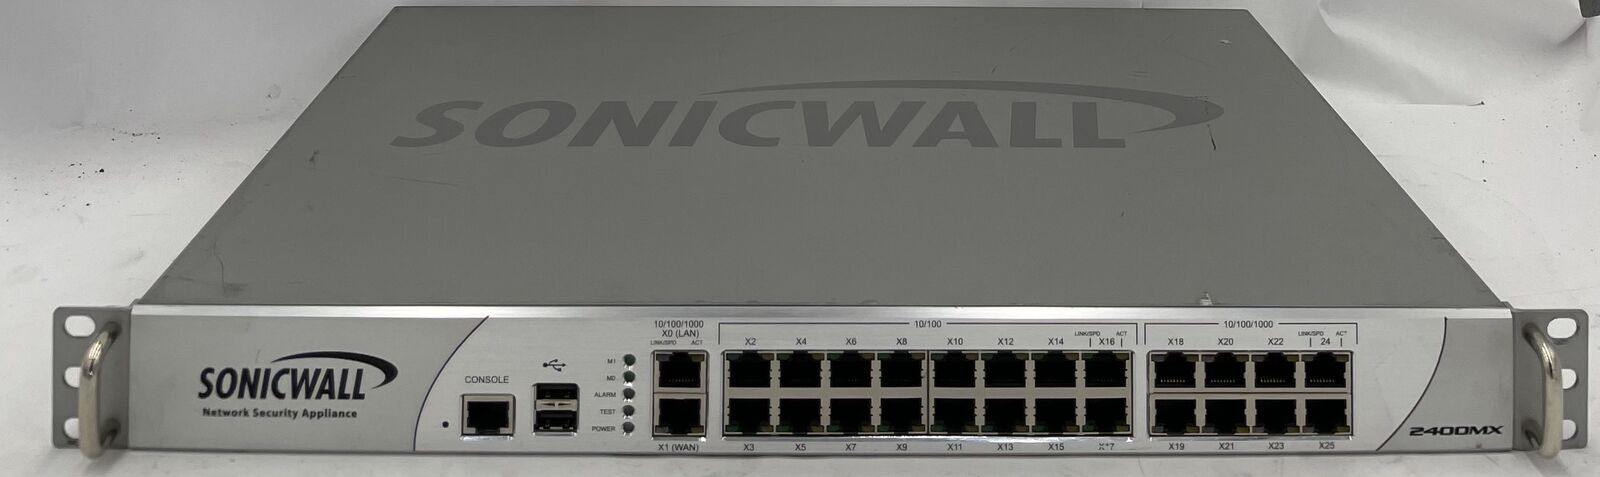 SonicWall NSA 2400MX Security Appliance